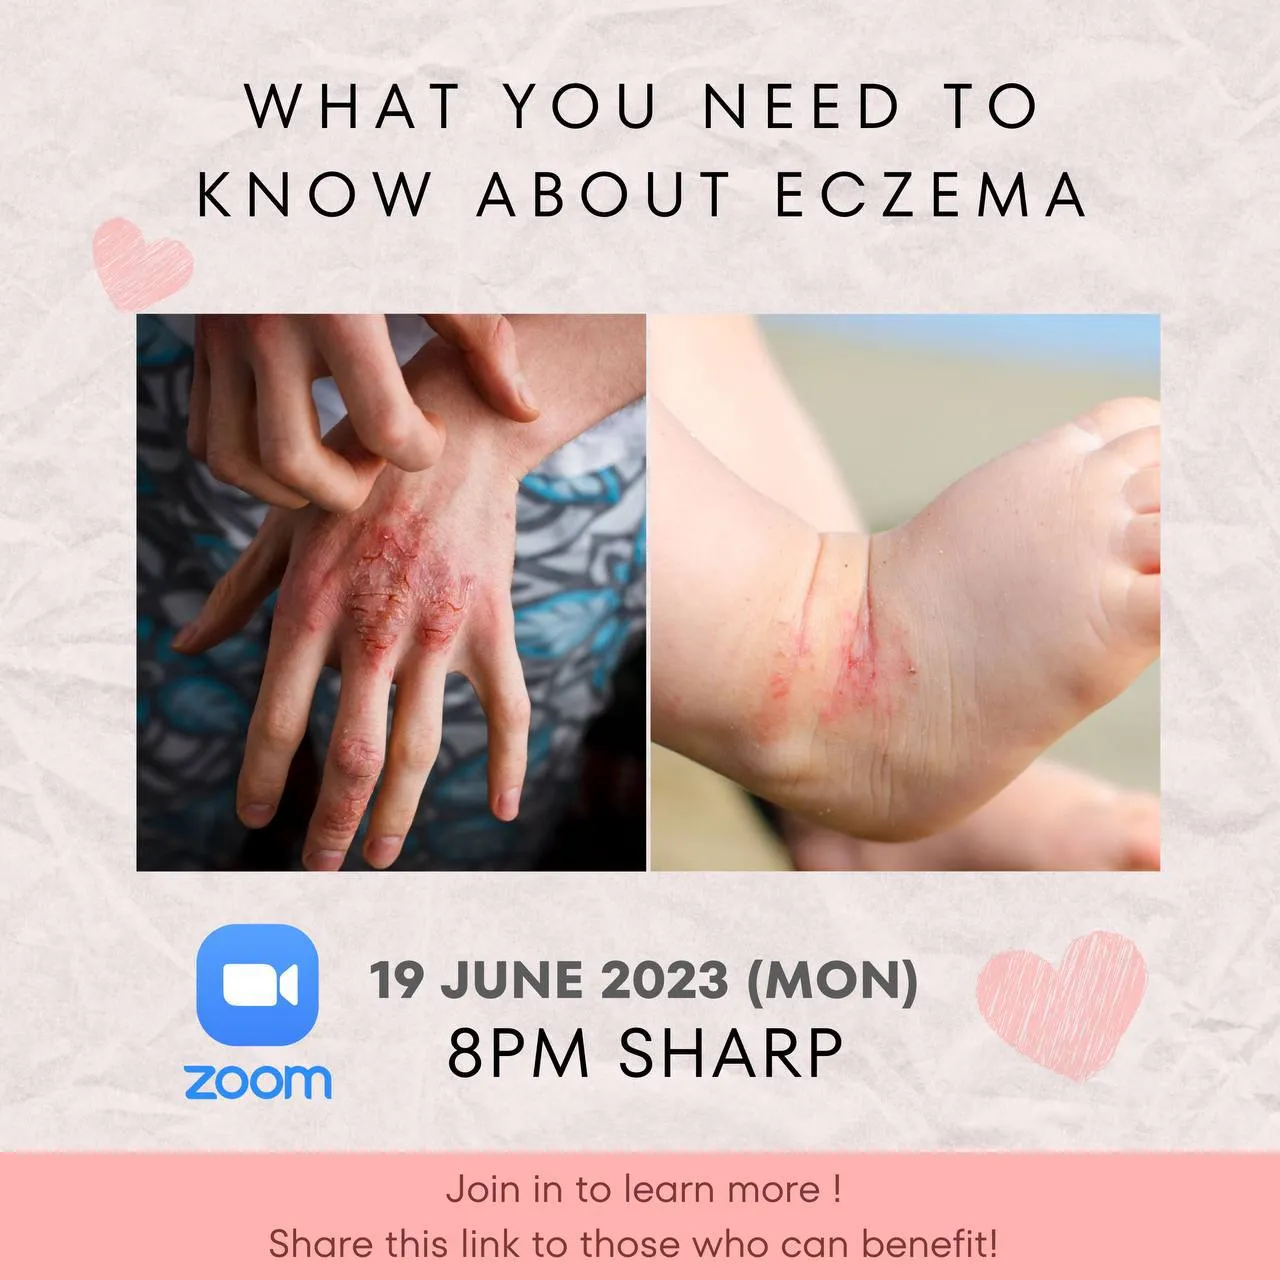 ✨Say Goodbye to Ezcema! ✨'s images